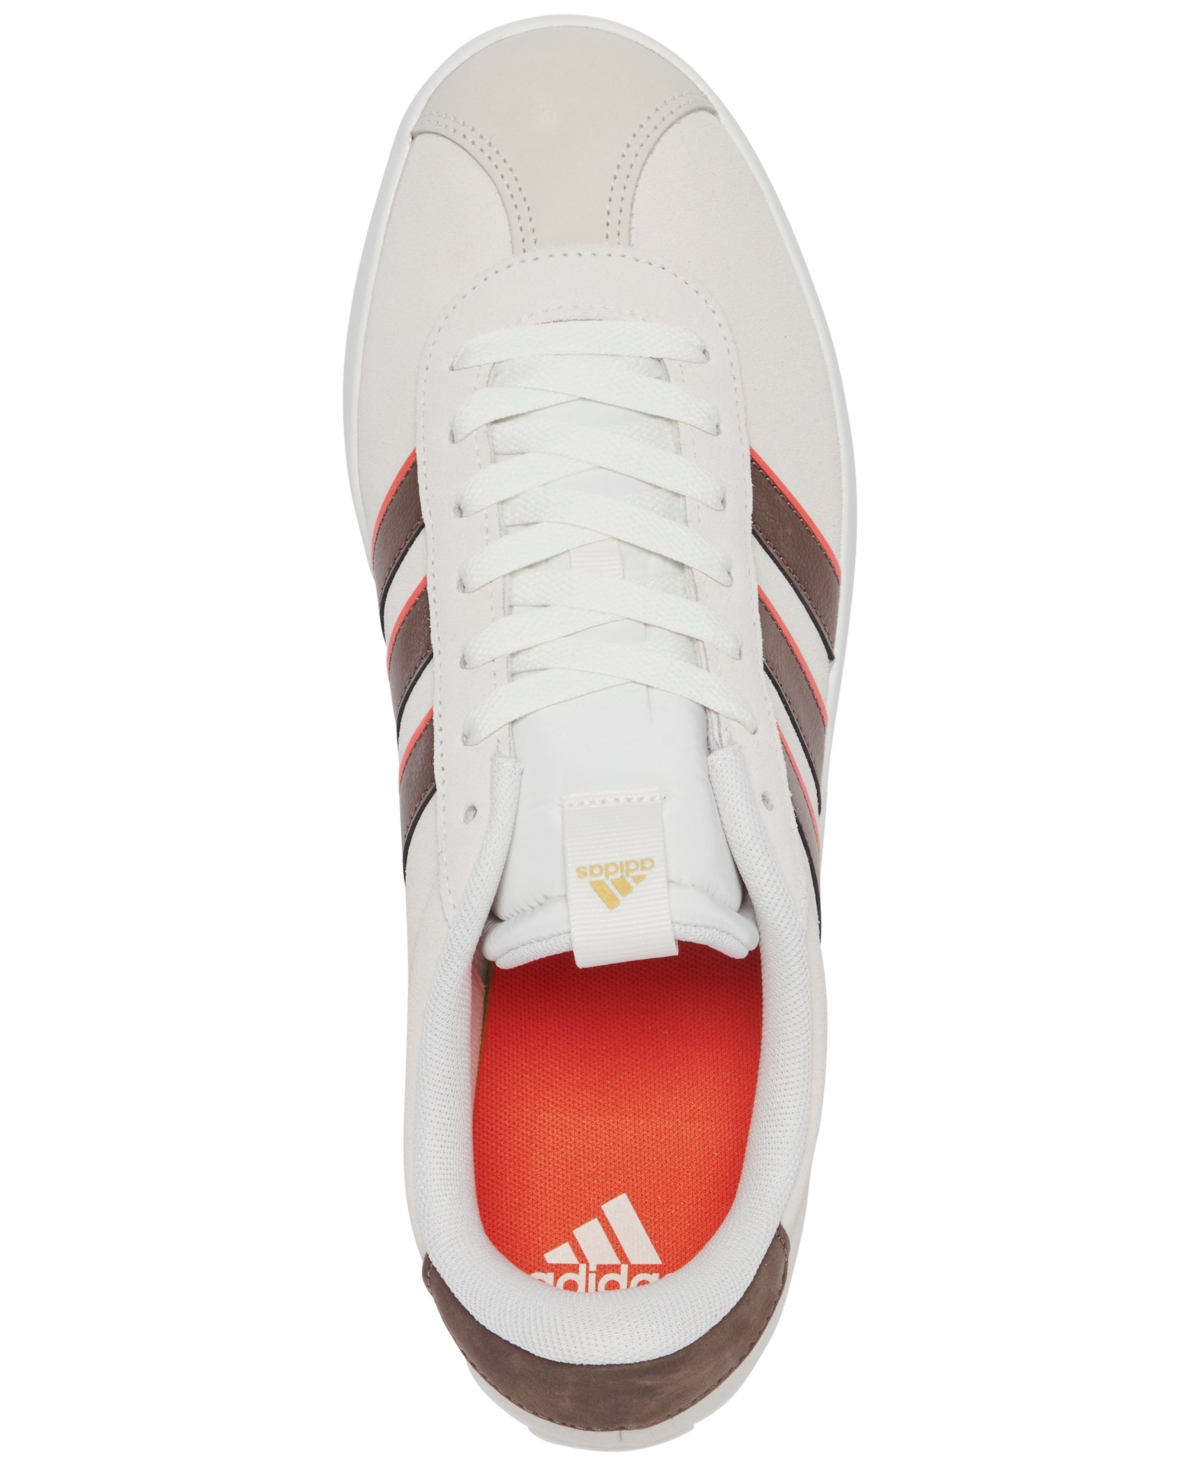 Shop Adidas Originals Men's Vl Court 3.0 Casual Sneakers From Finish Line In Off White,earth Strata,go